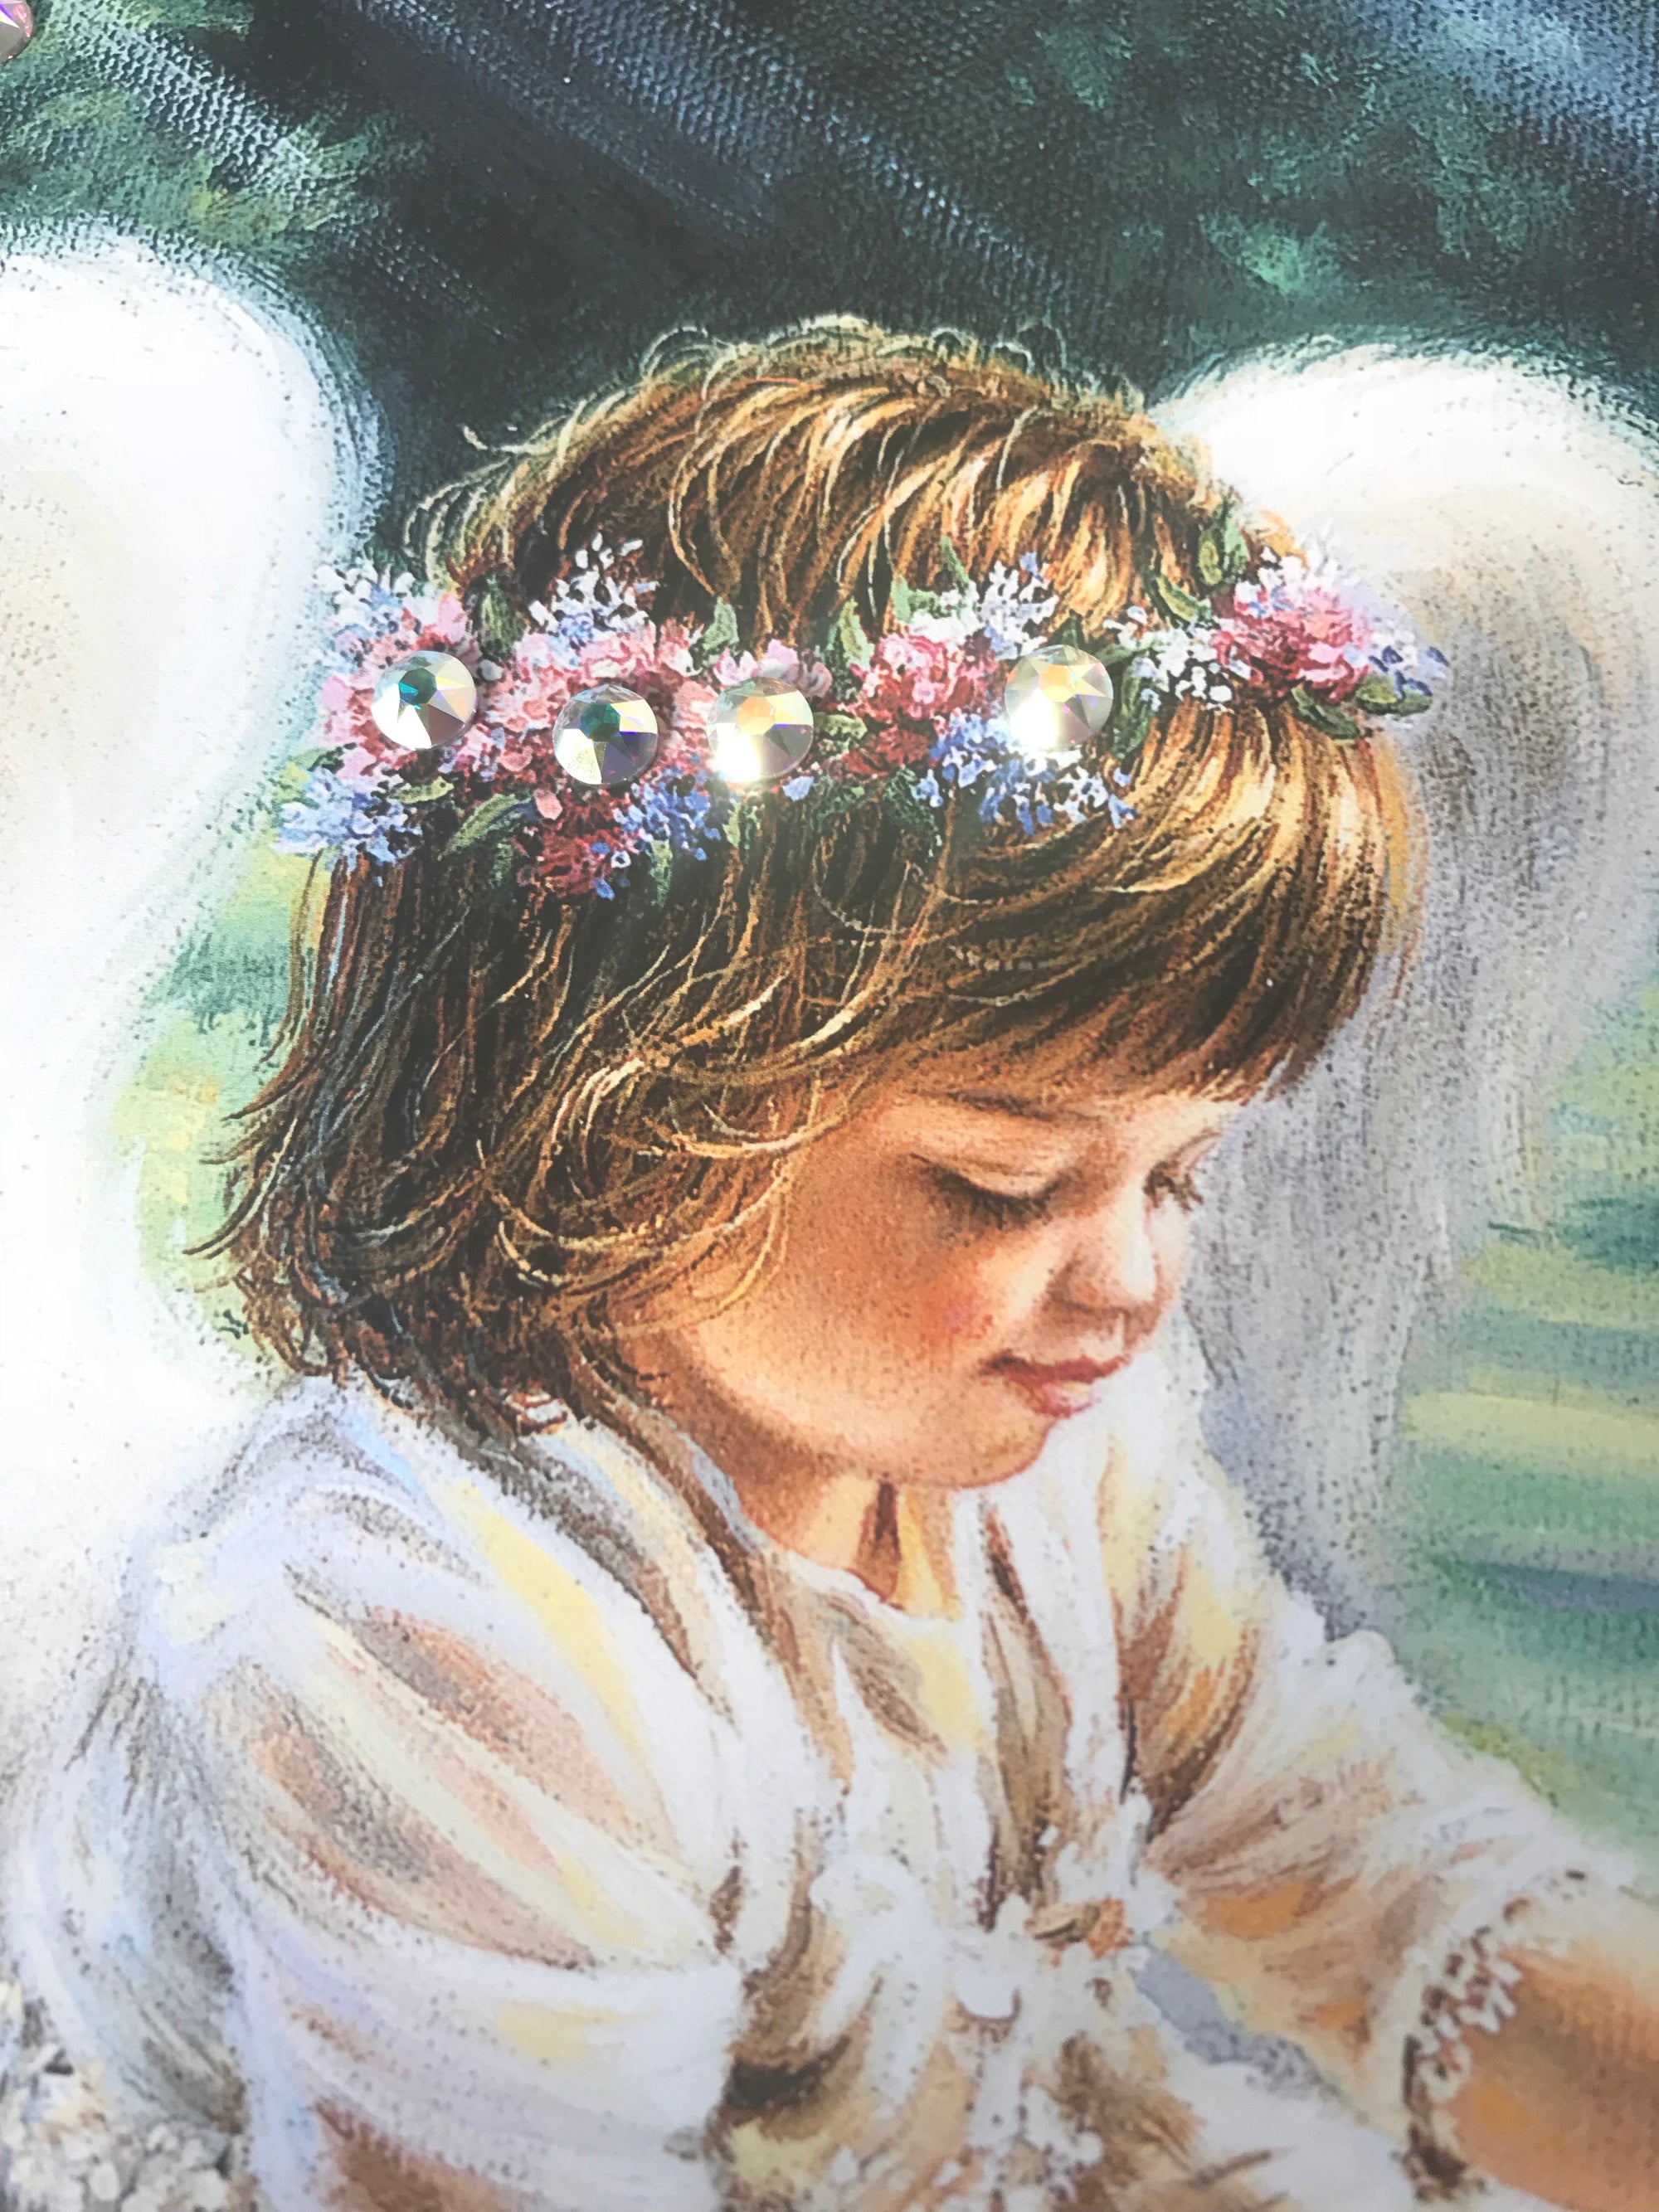 An Angel's Care Pizazz Print with Dazzling Crystals. A zoom in of the young angel